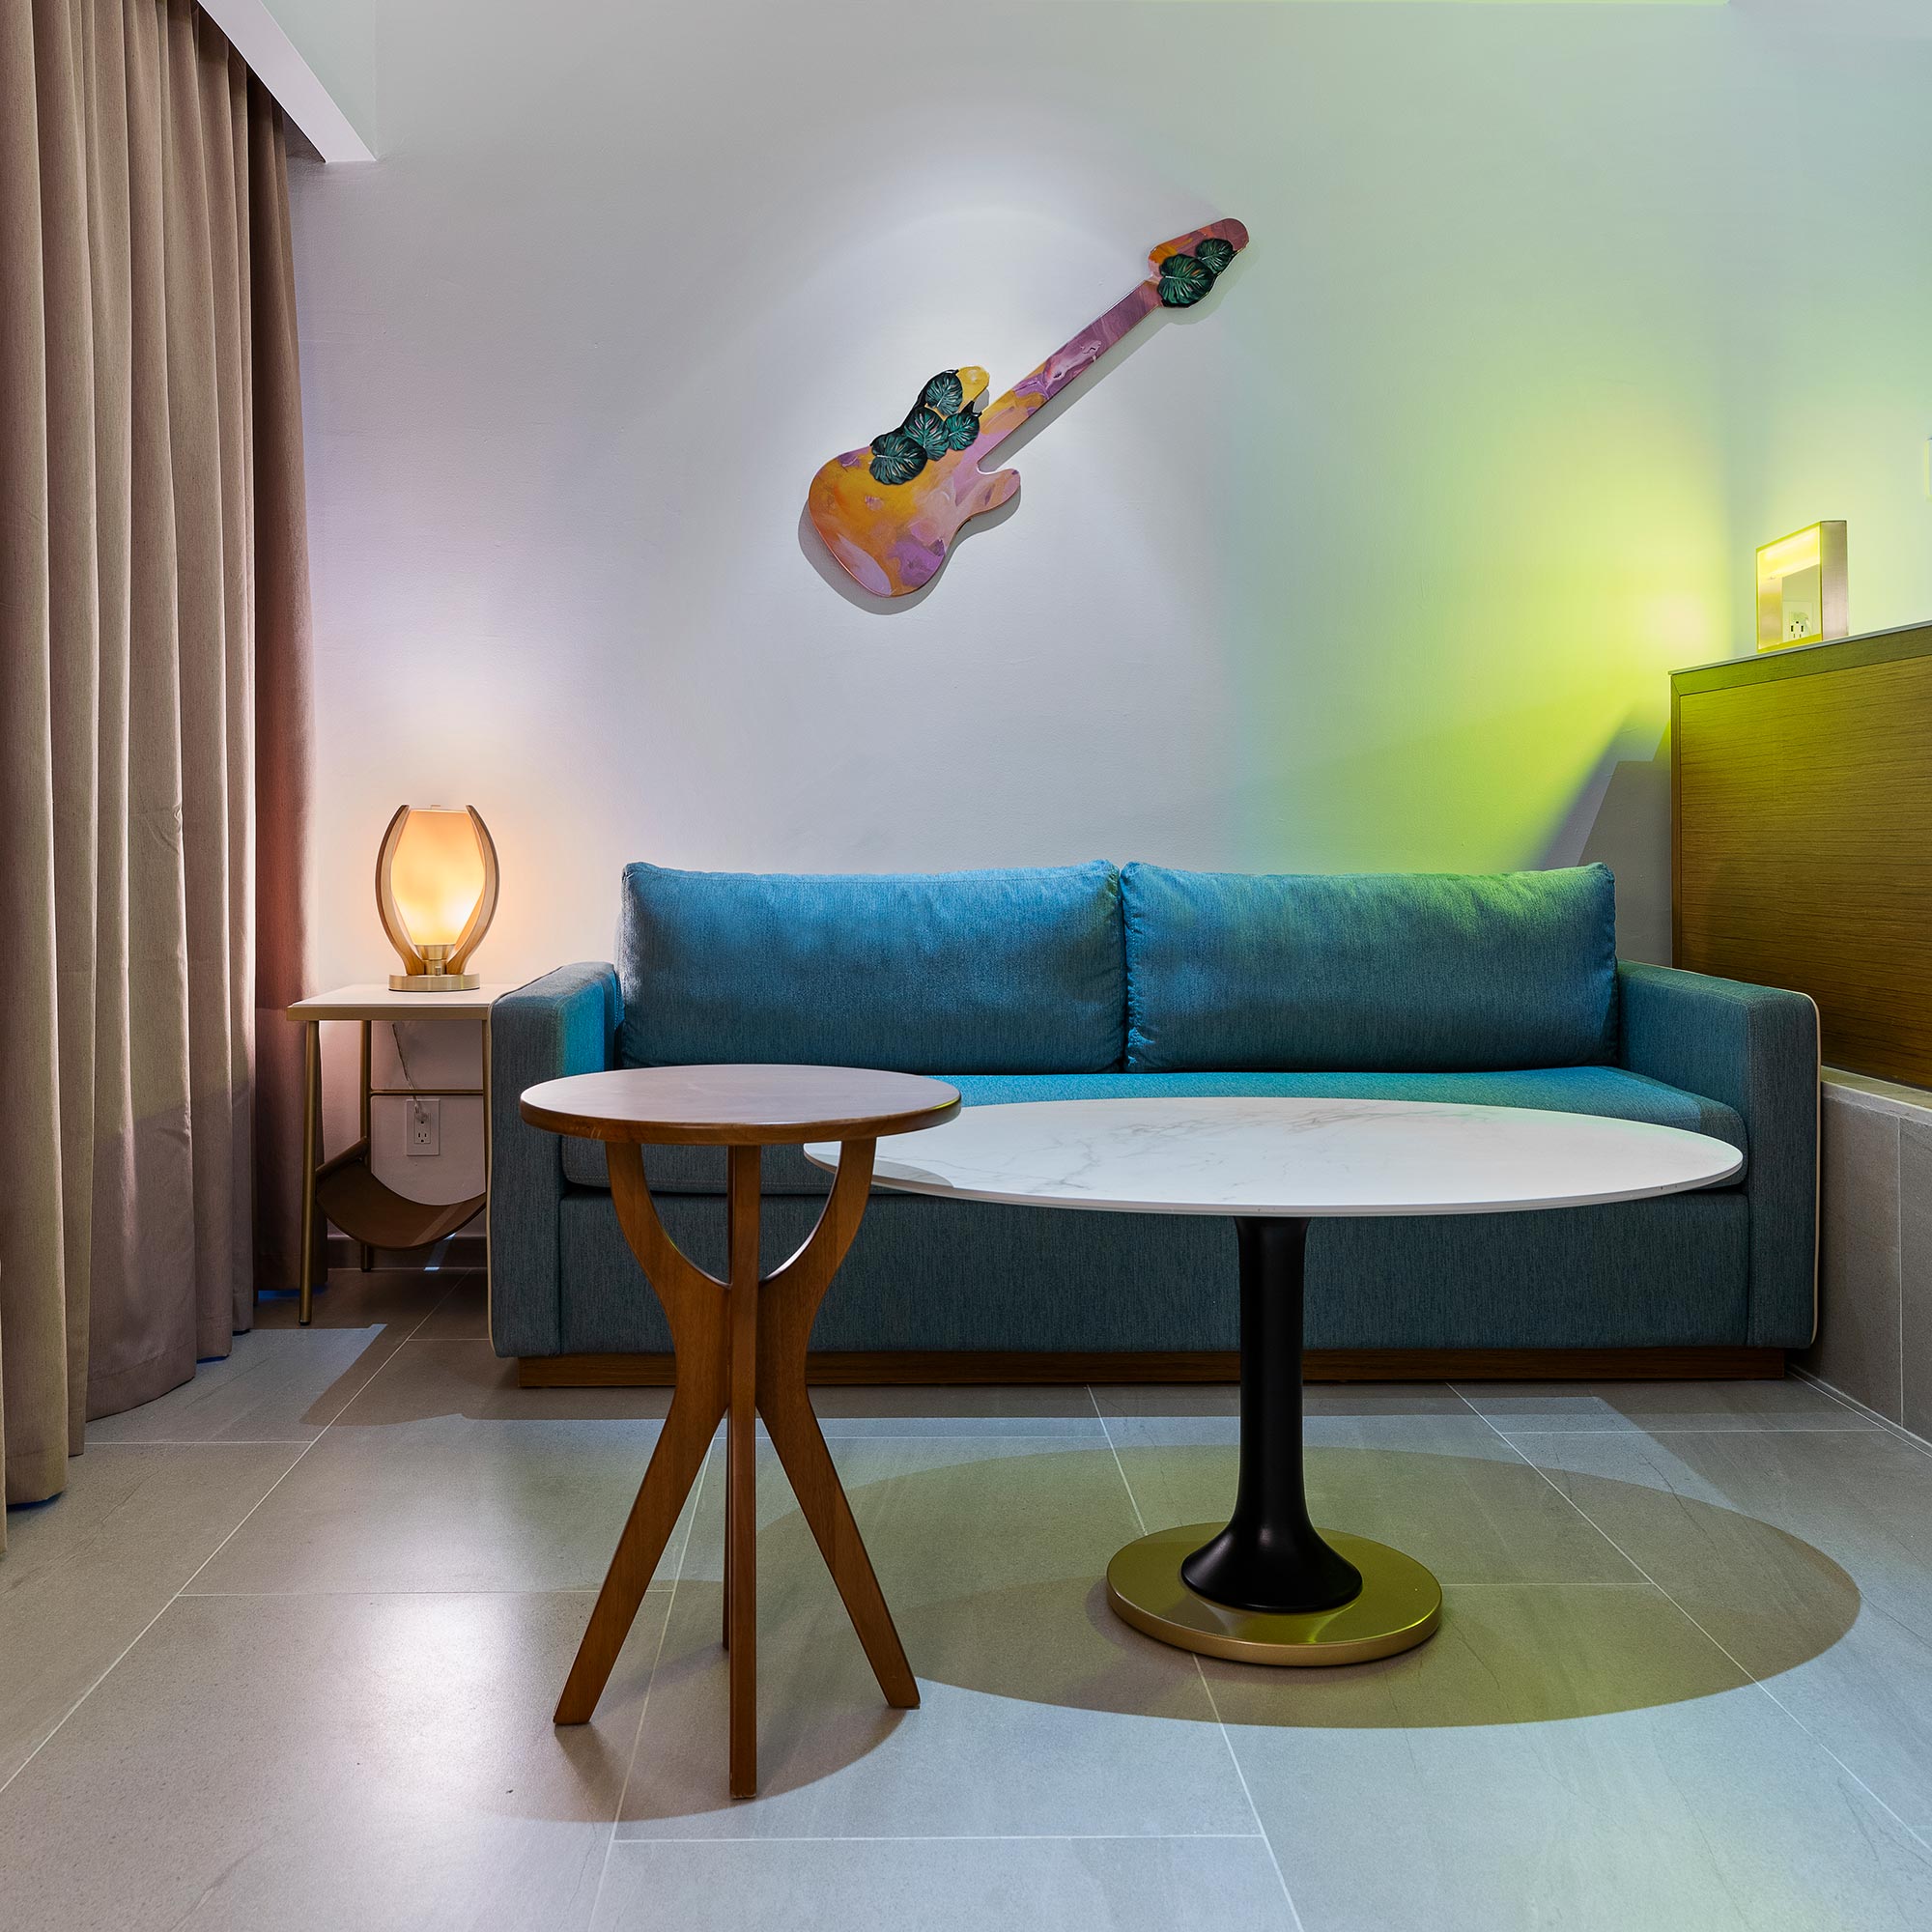 Image of Hard Rock Hotel Punta Cana 19 in {{Dekton, a touch of luxury for the rooms of the Hard Rock Hotel Punta Cana}} - Cosentino